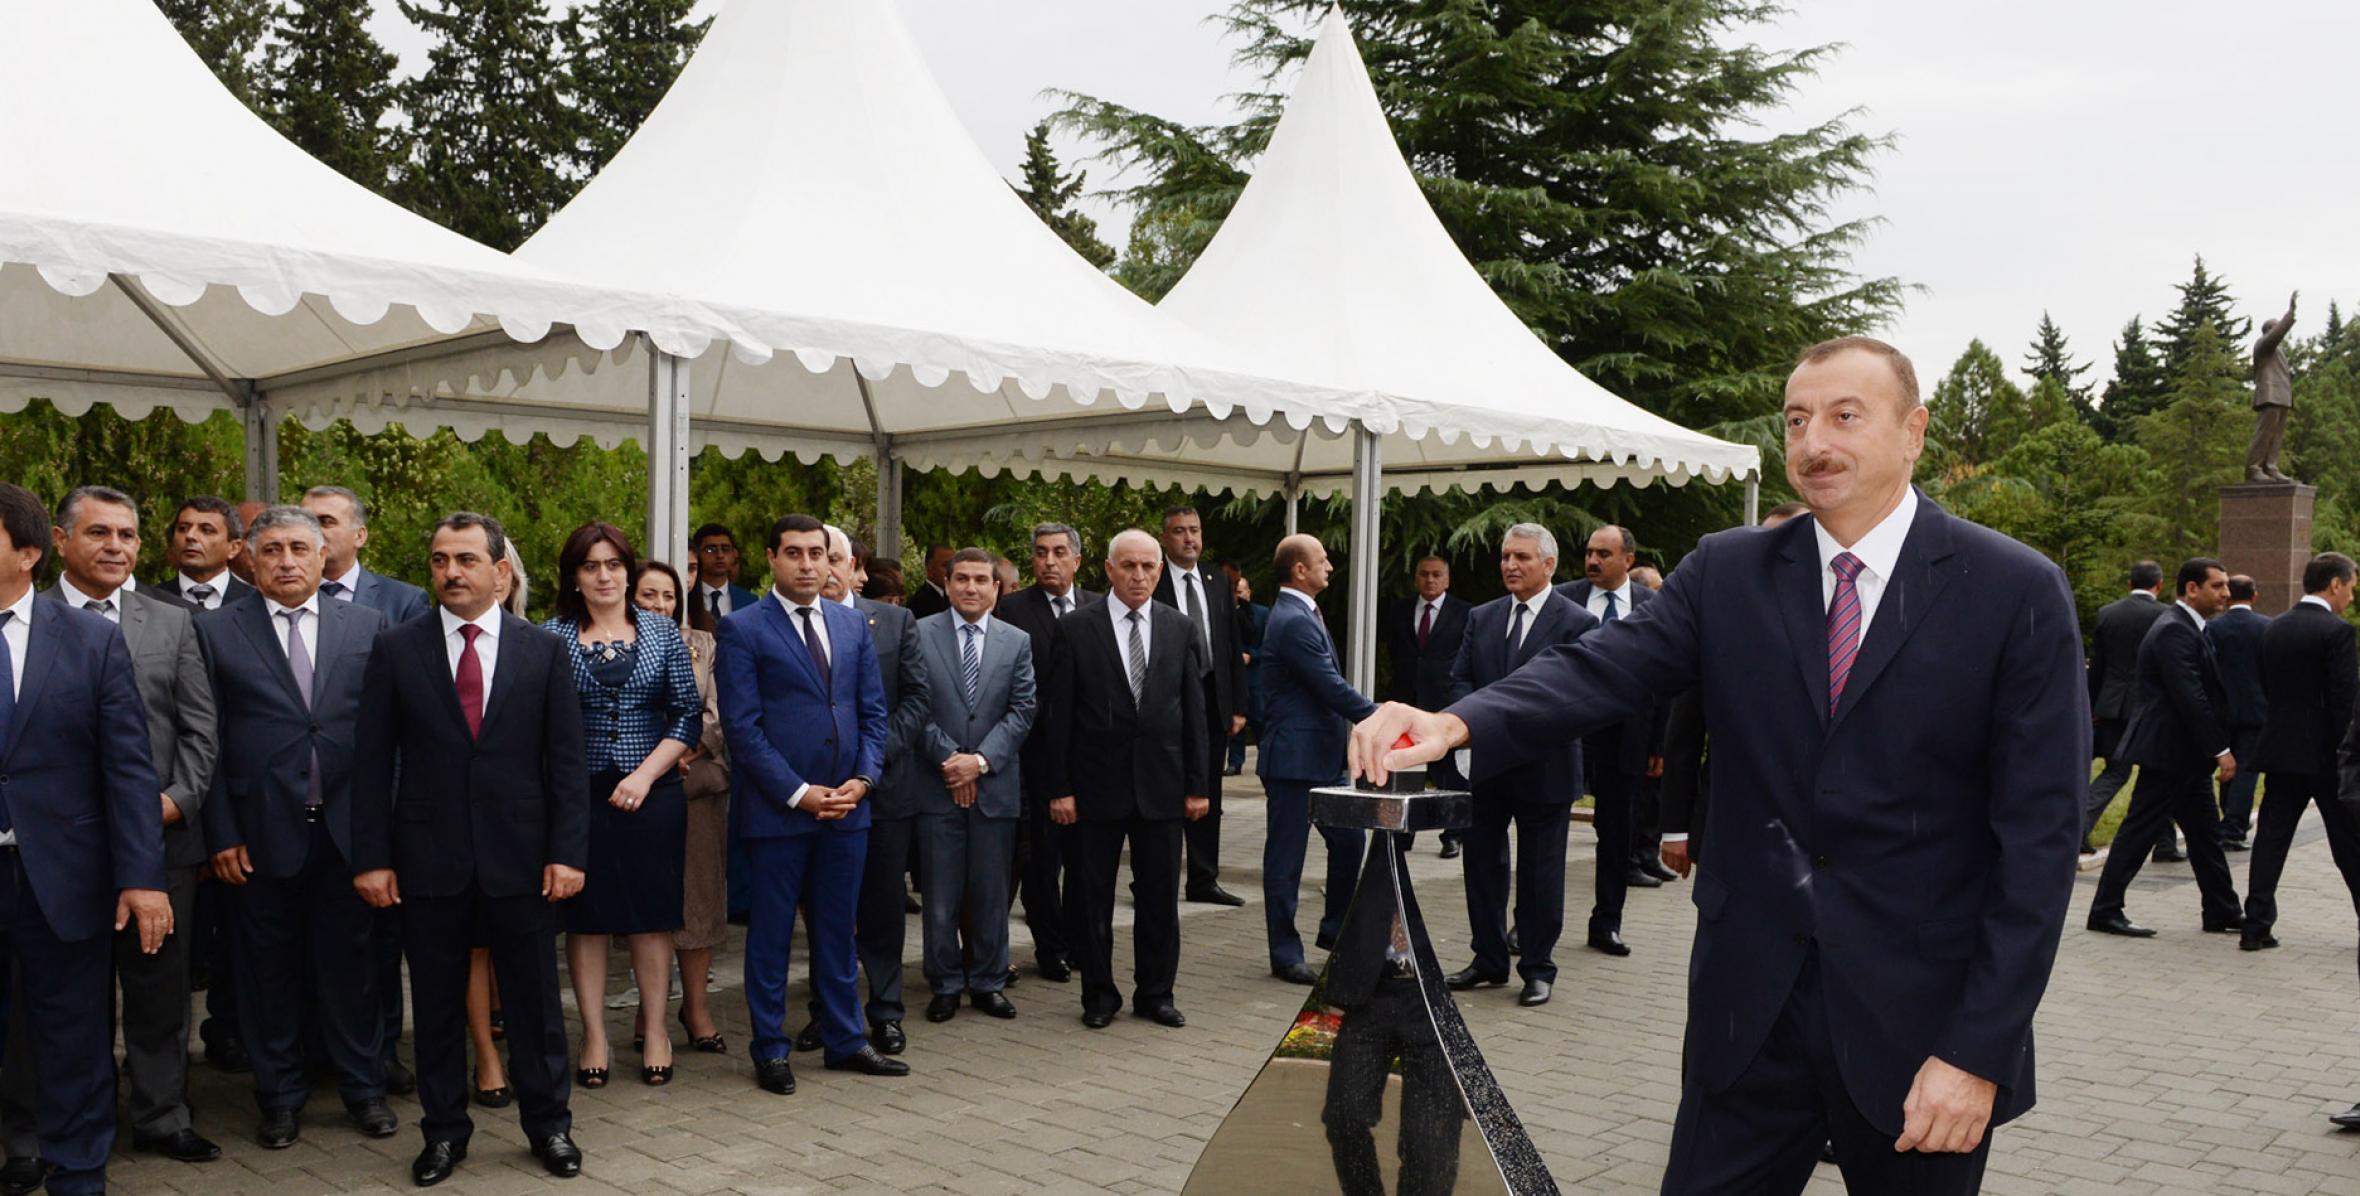 Ilham Aliyev attended the ceremony to mark the supply of drinking water to Naftalan